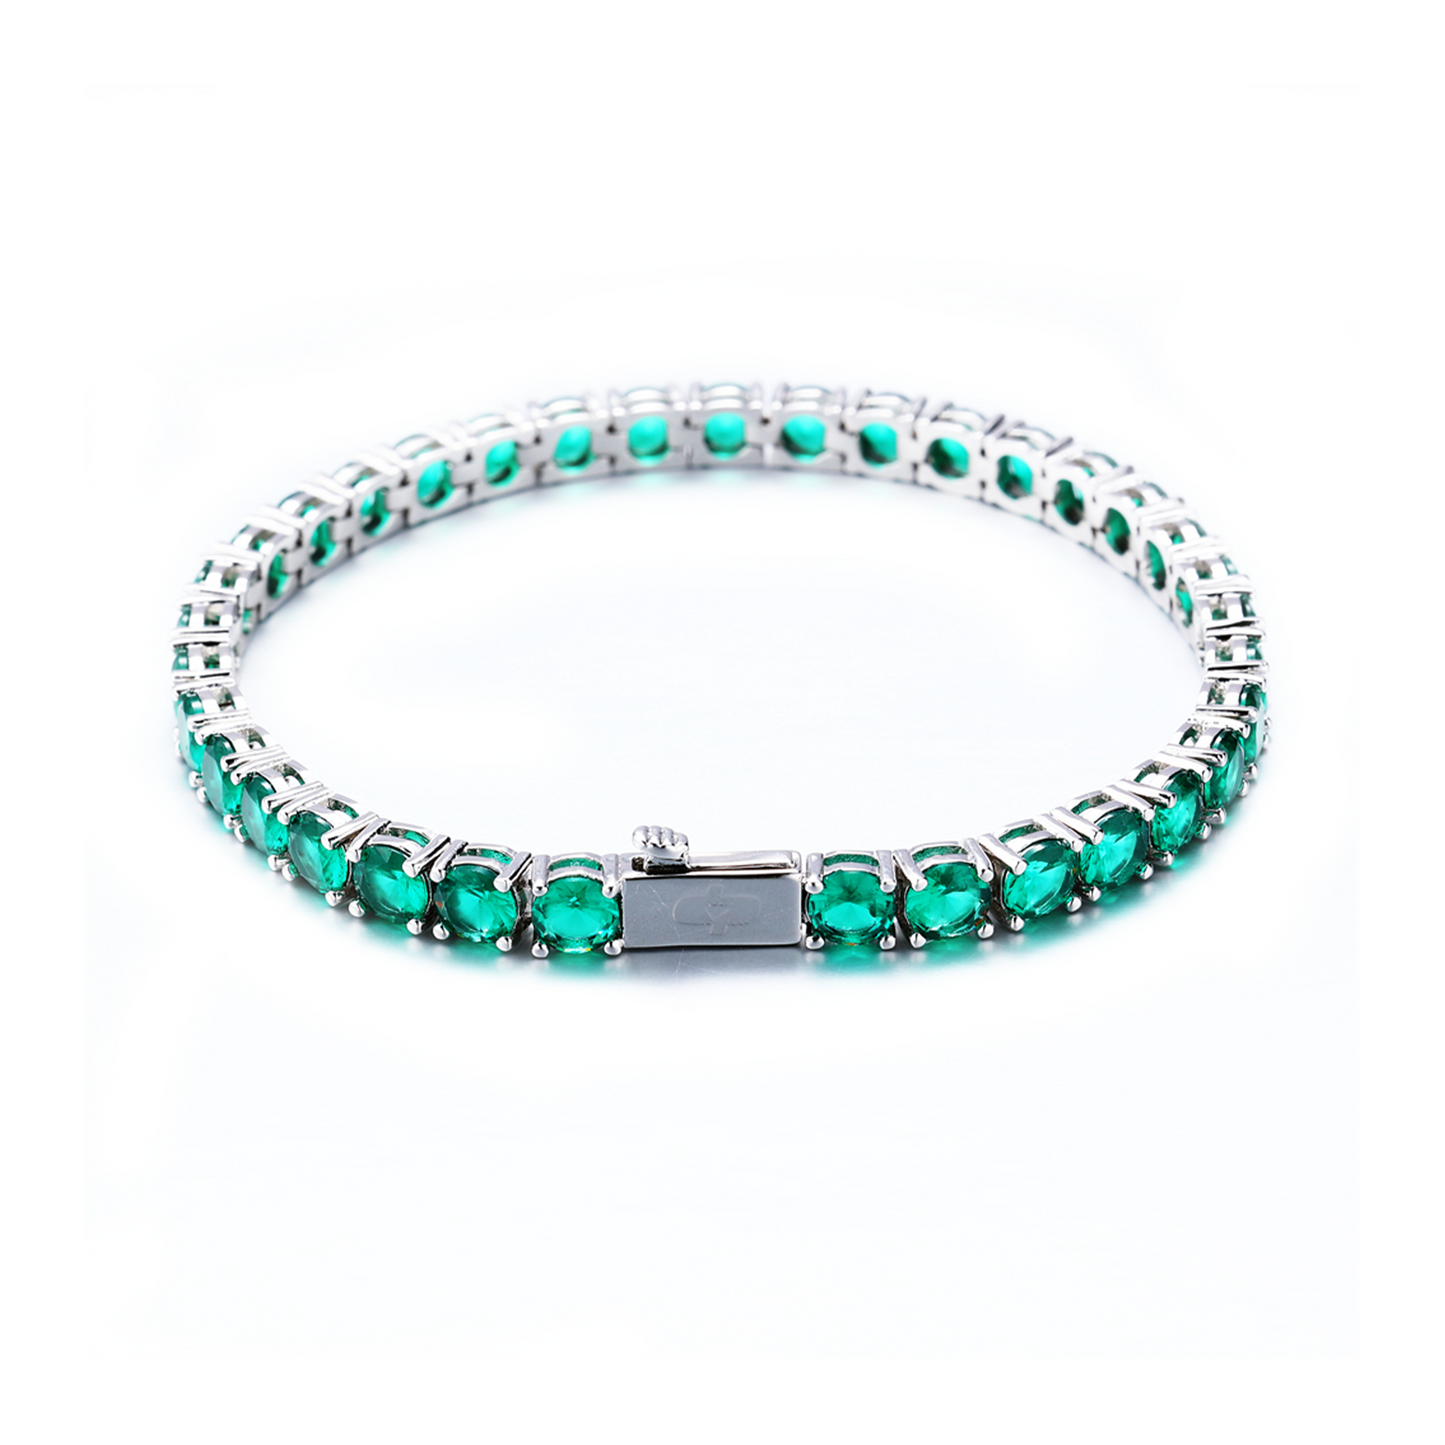 Tennis Bracelet With Emerald Stone In White Gold - 5mm